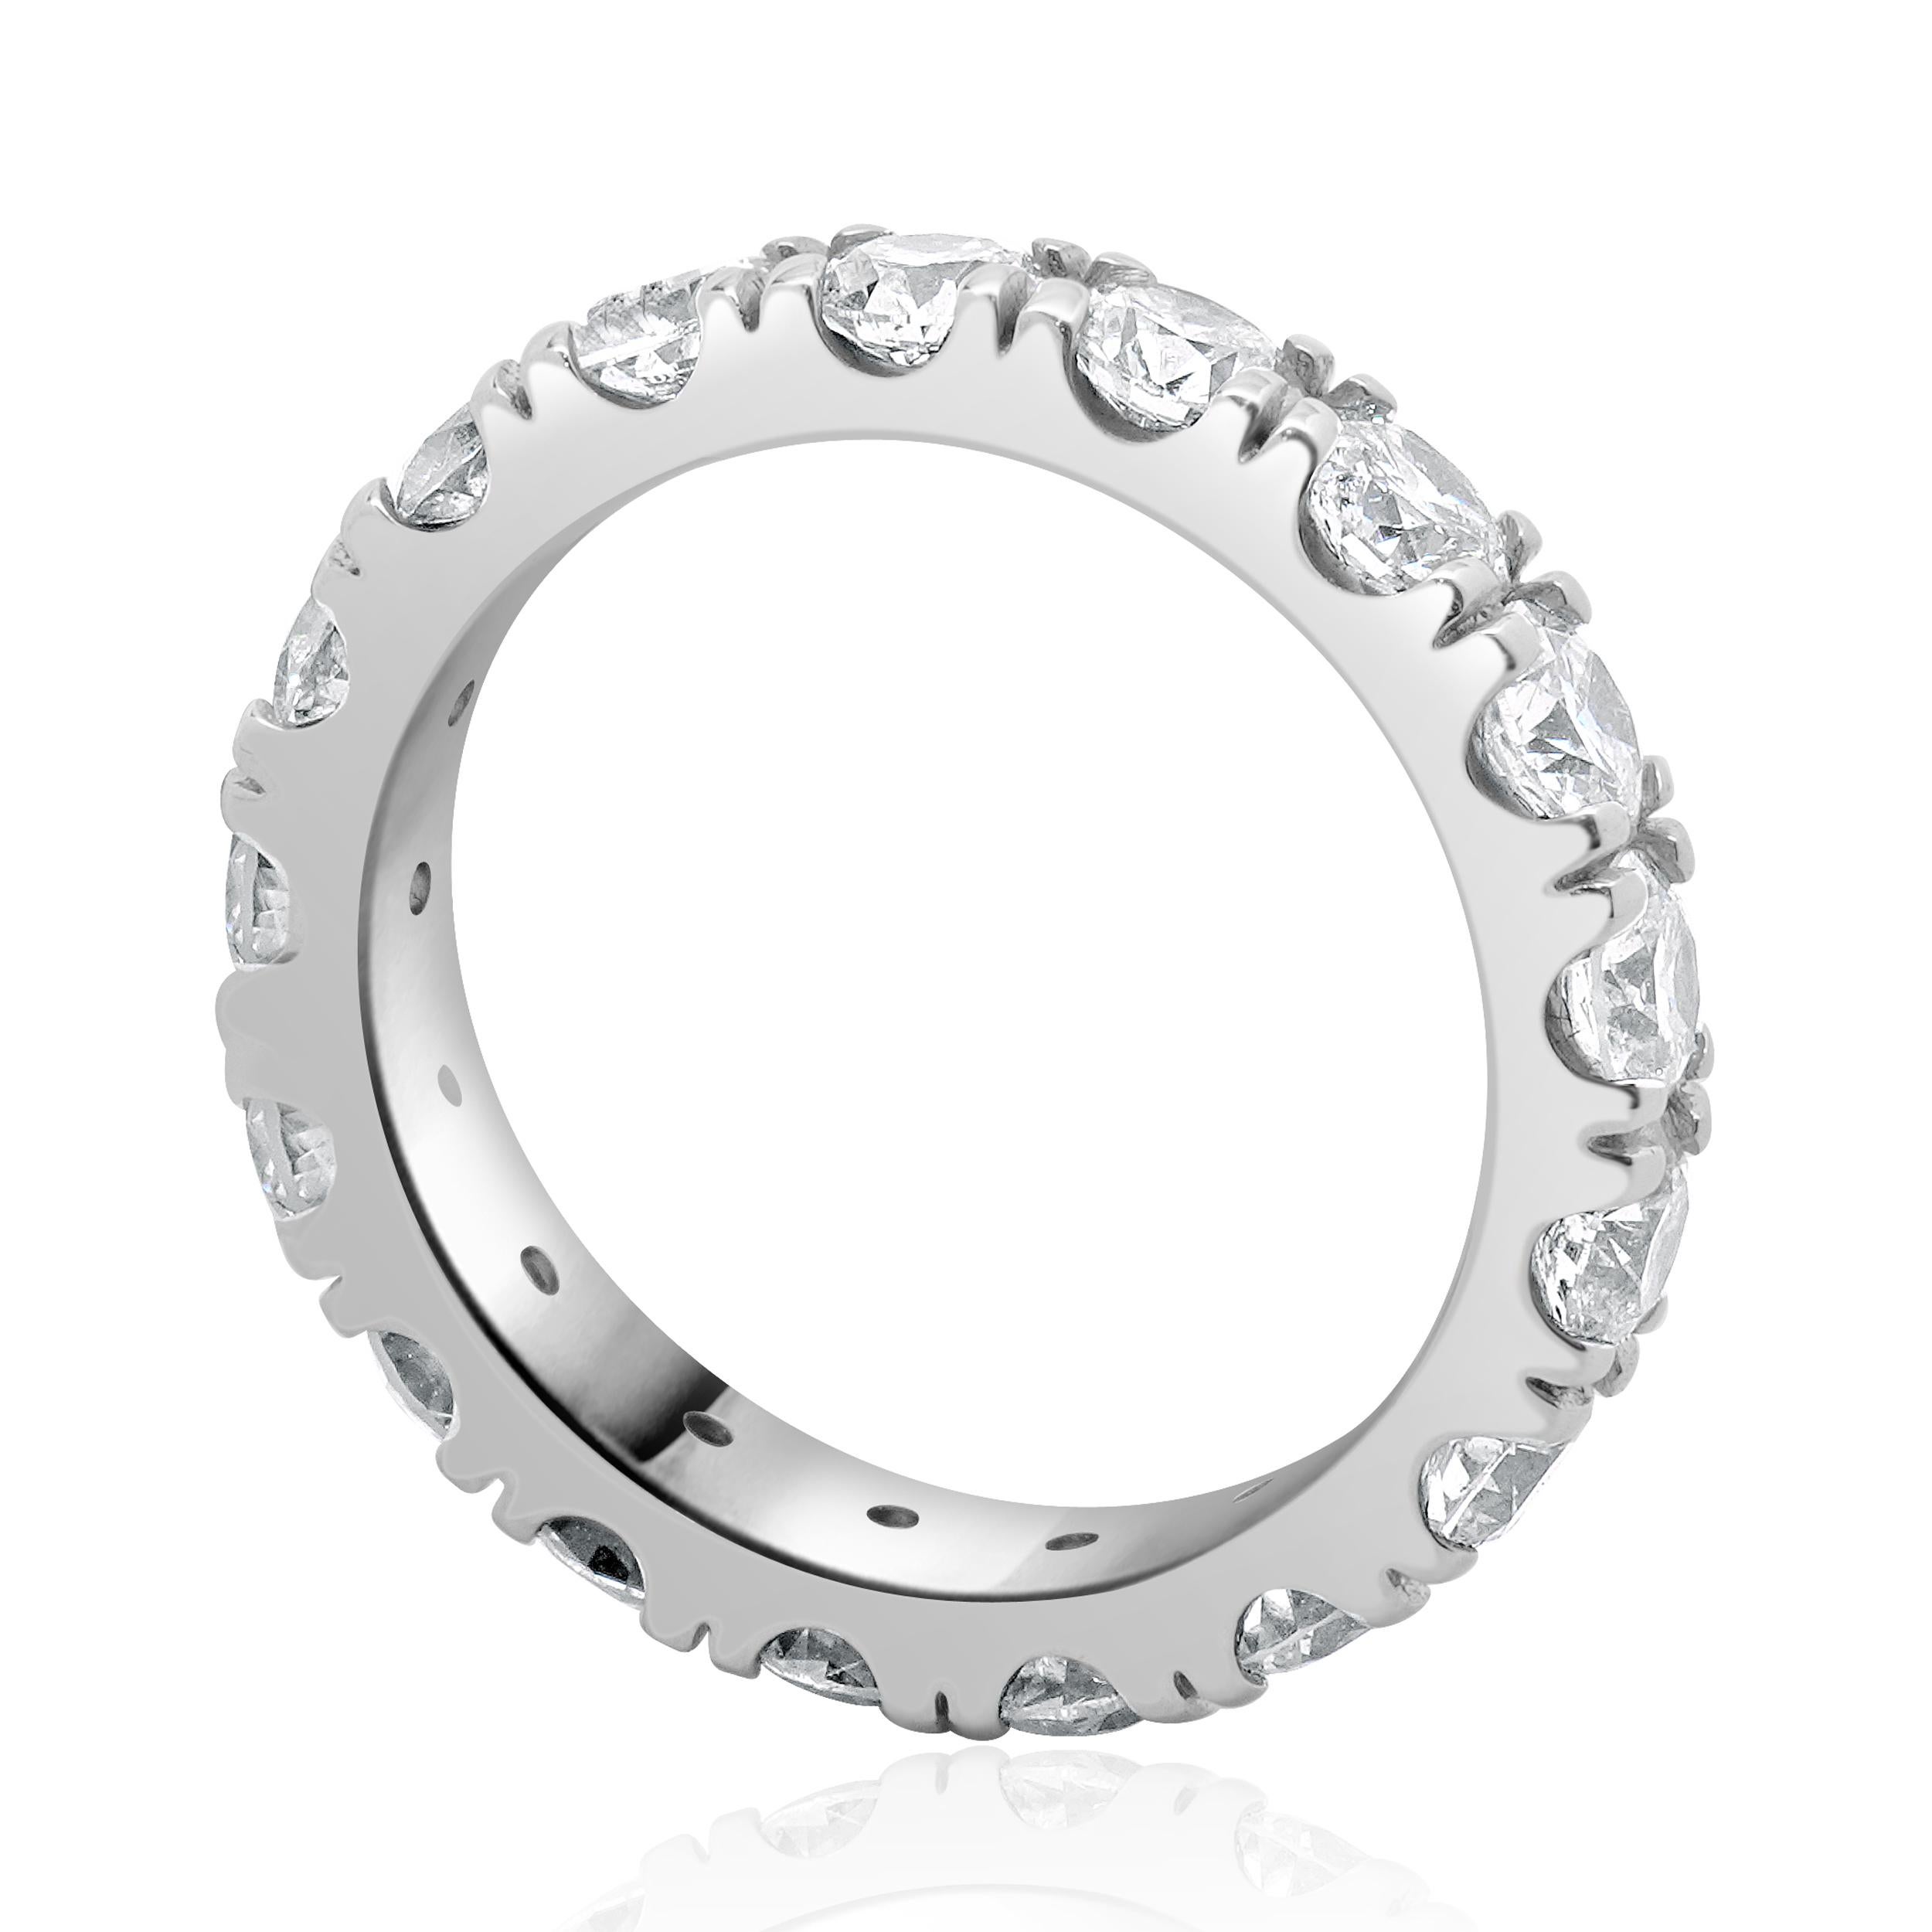 14 Karat White Gold Eternity Band In Excellent Condition For Sale In Scottsdale, AZ